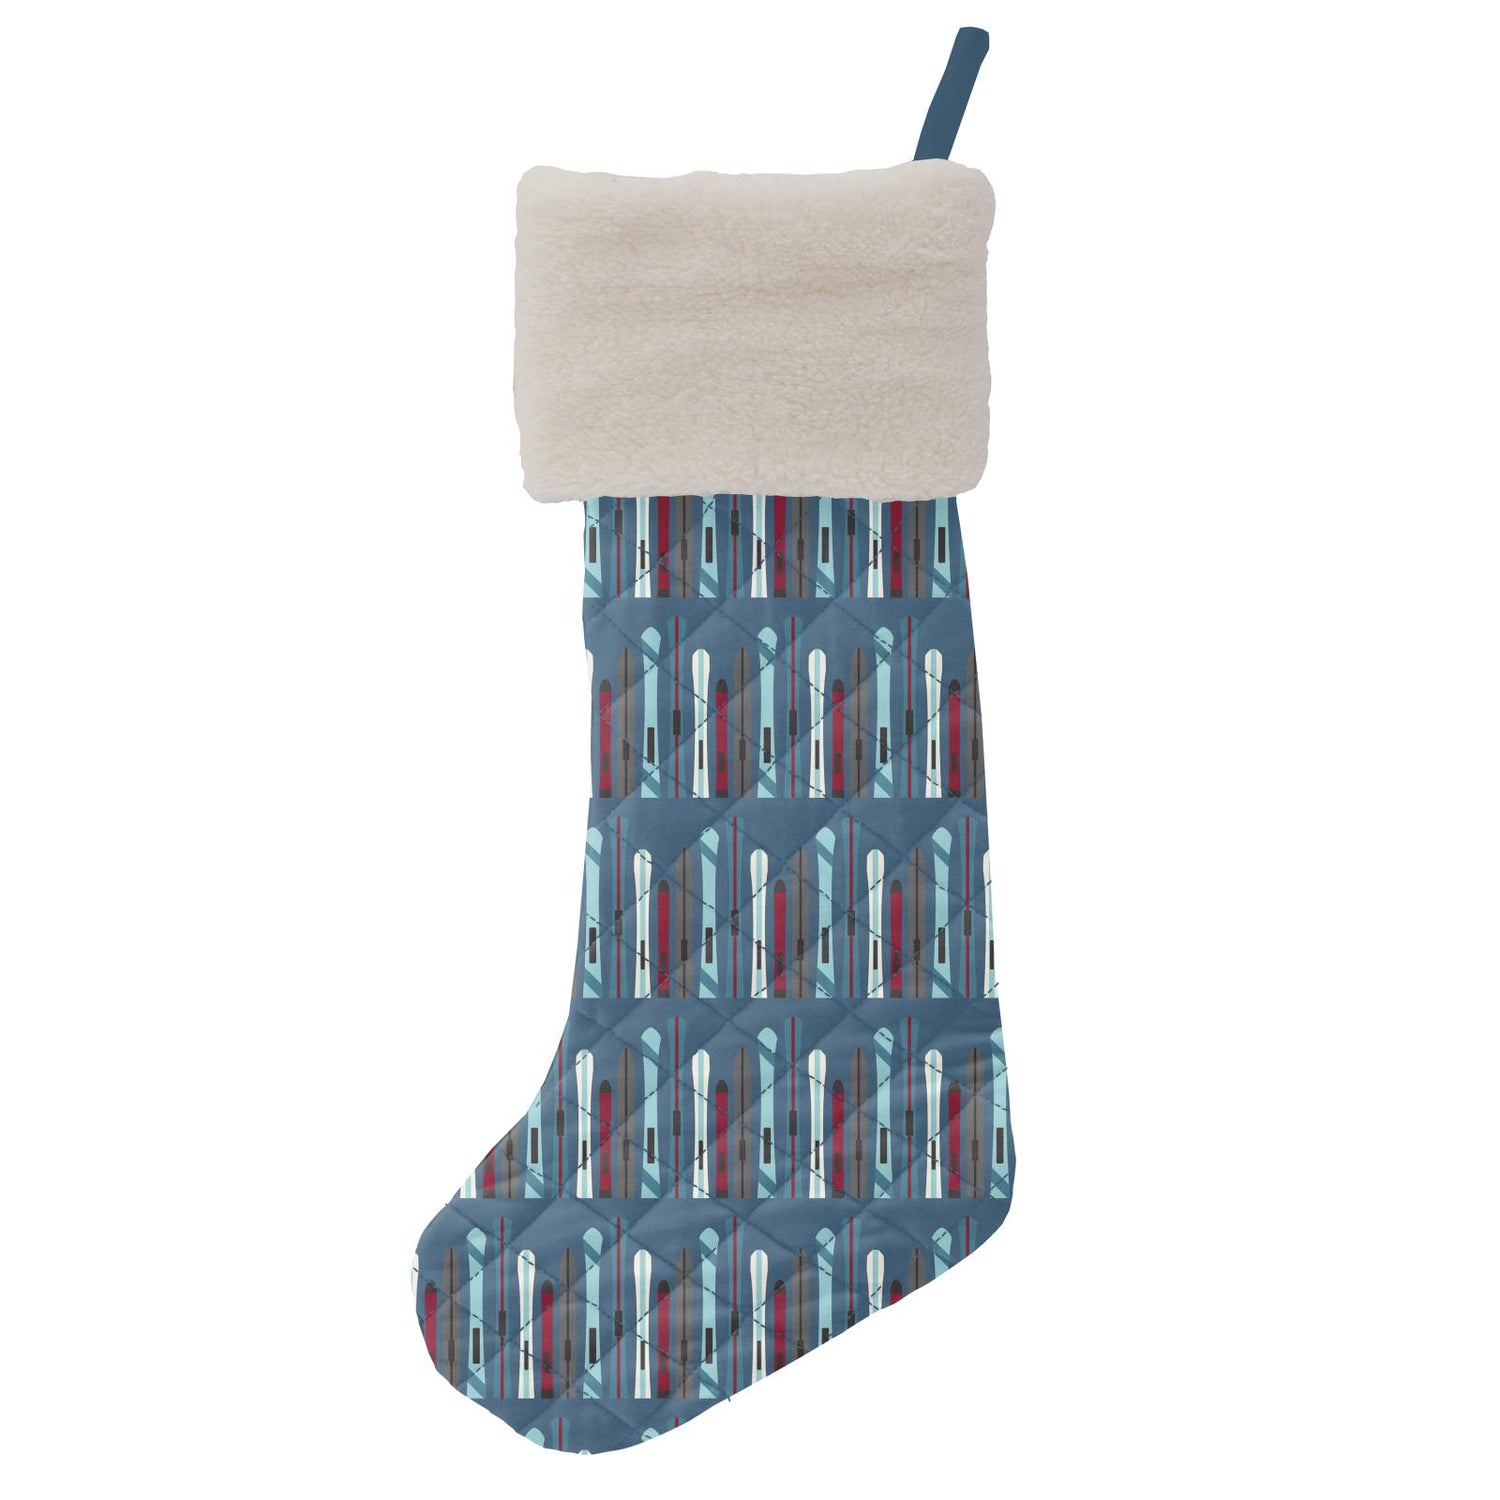 Quilted Stocking in Twilight Skis/Midnight Tiny Snowflakes